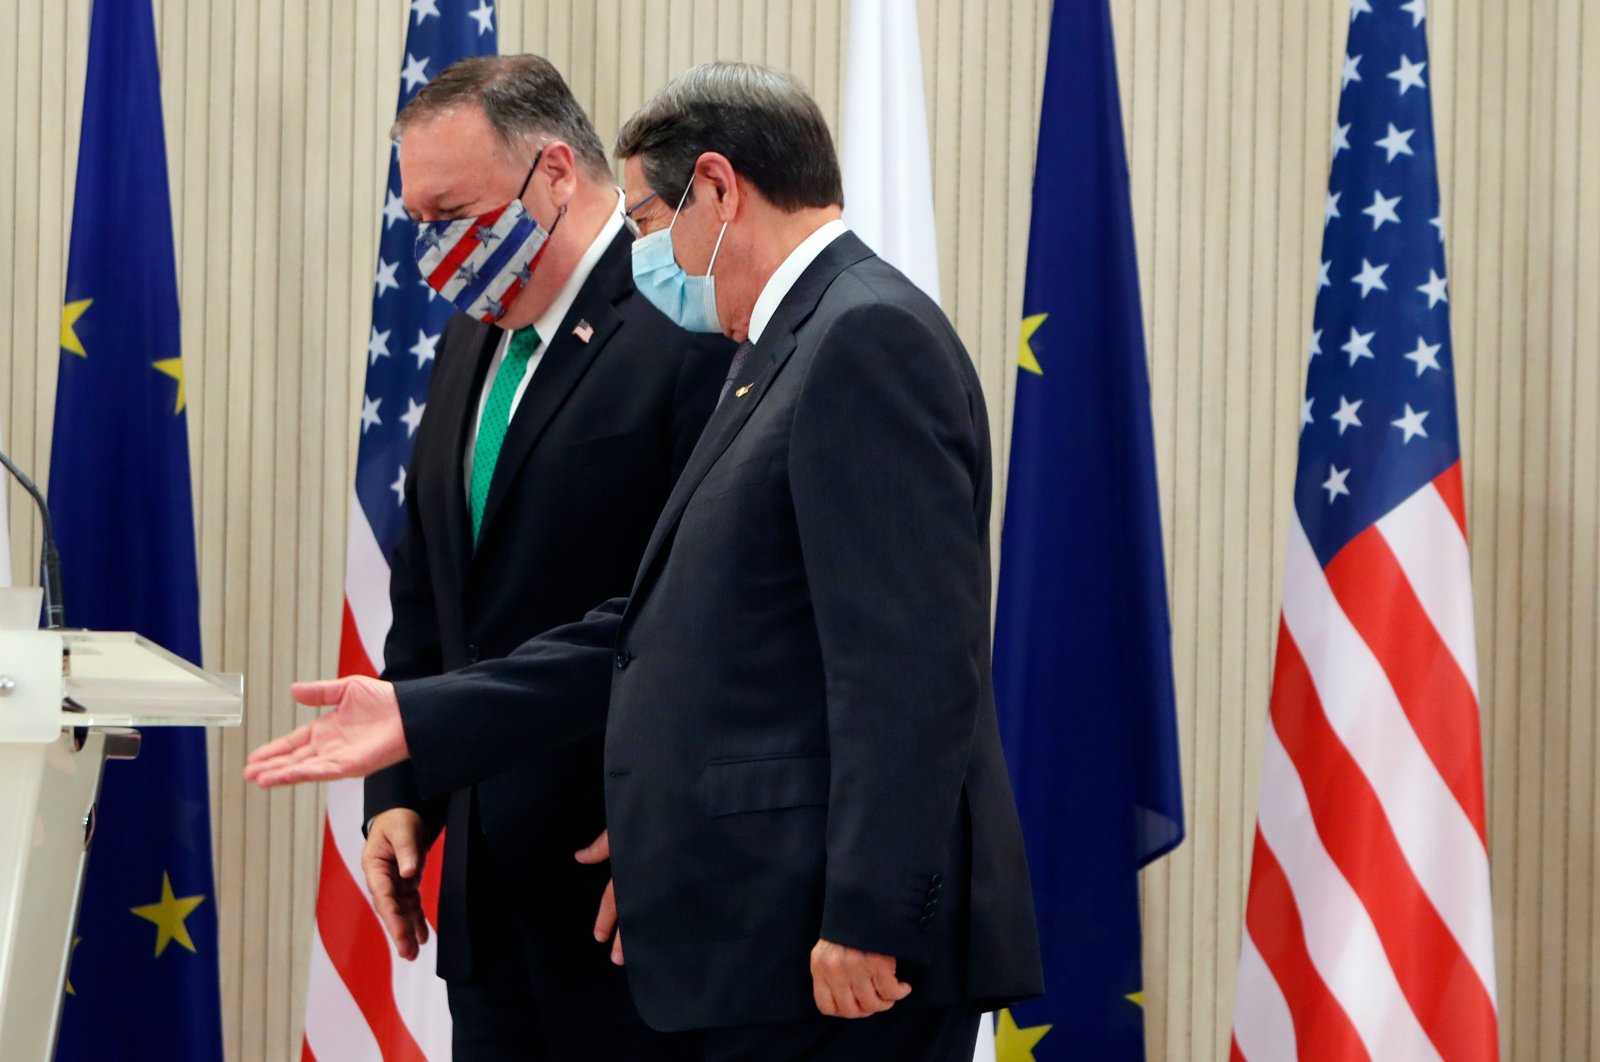 U.S. Secretary of State Mike Pompeo (L) and Greek Cypriot leader Nicos Anastasiades walk away after giving a joint press conference in Nicosia on Sept. 12, 2020. (AFP Photo)